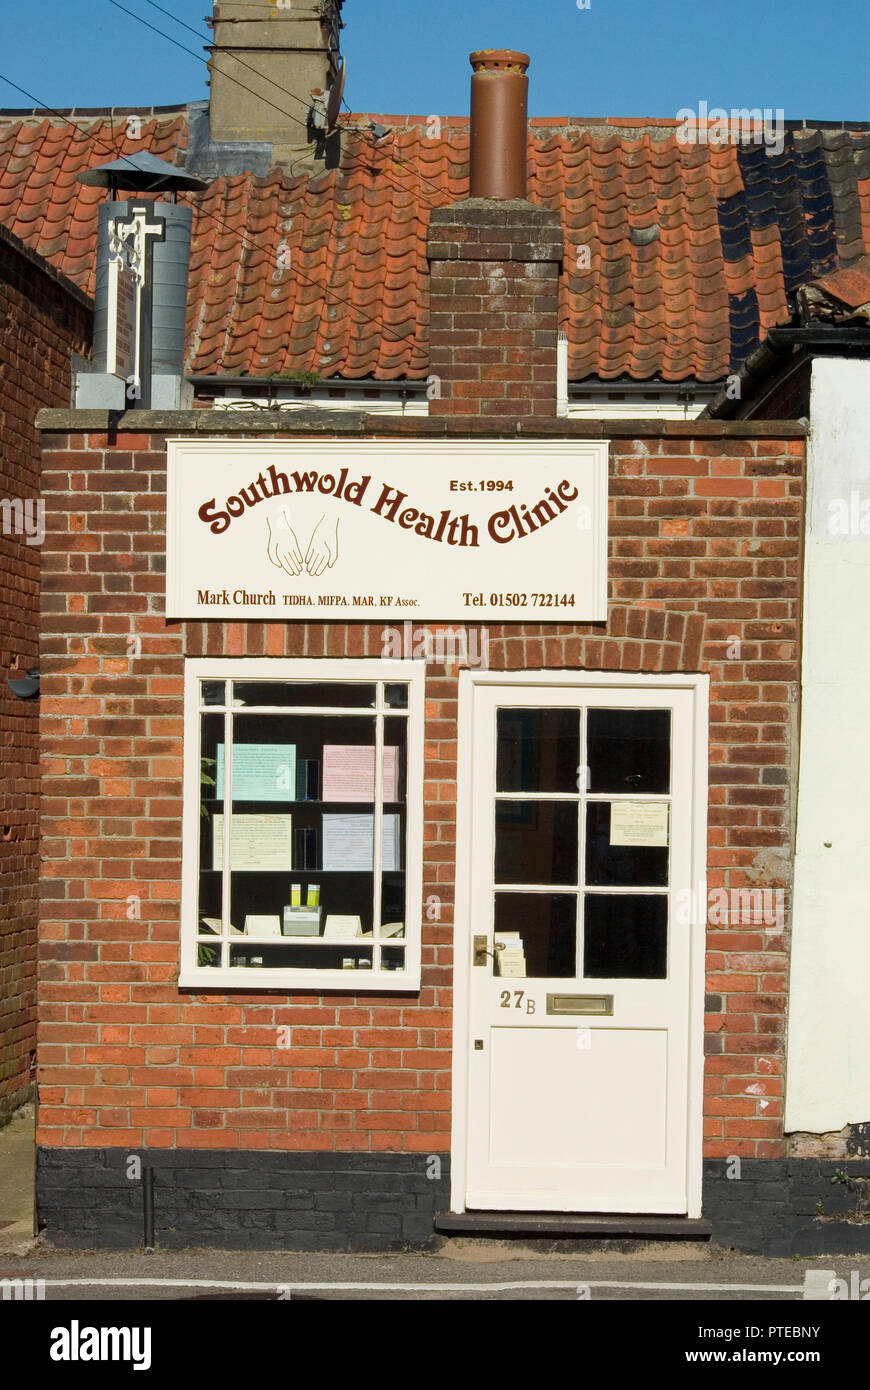 Southwold Health Clinic Stock Photo